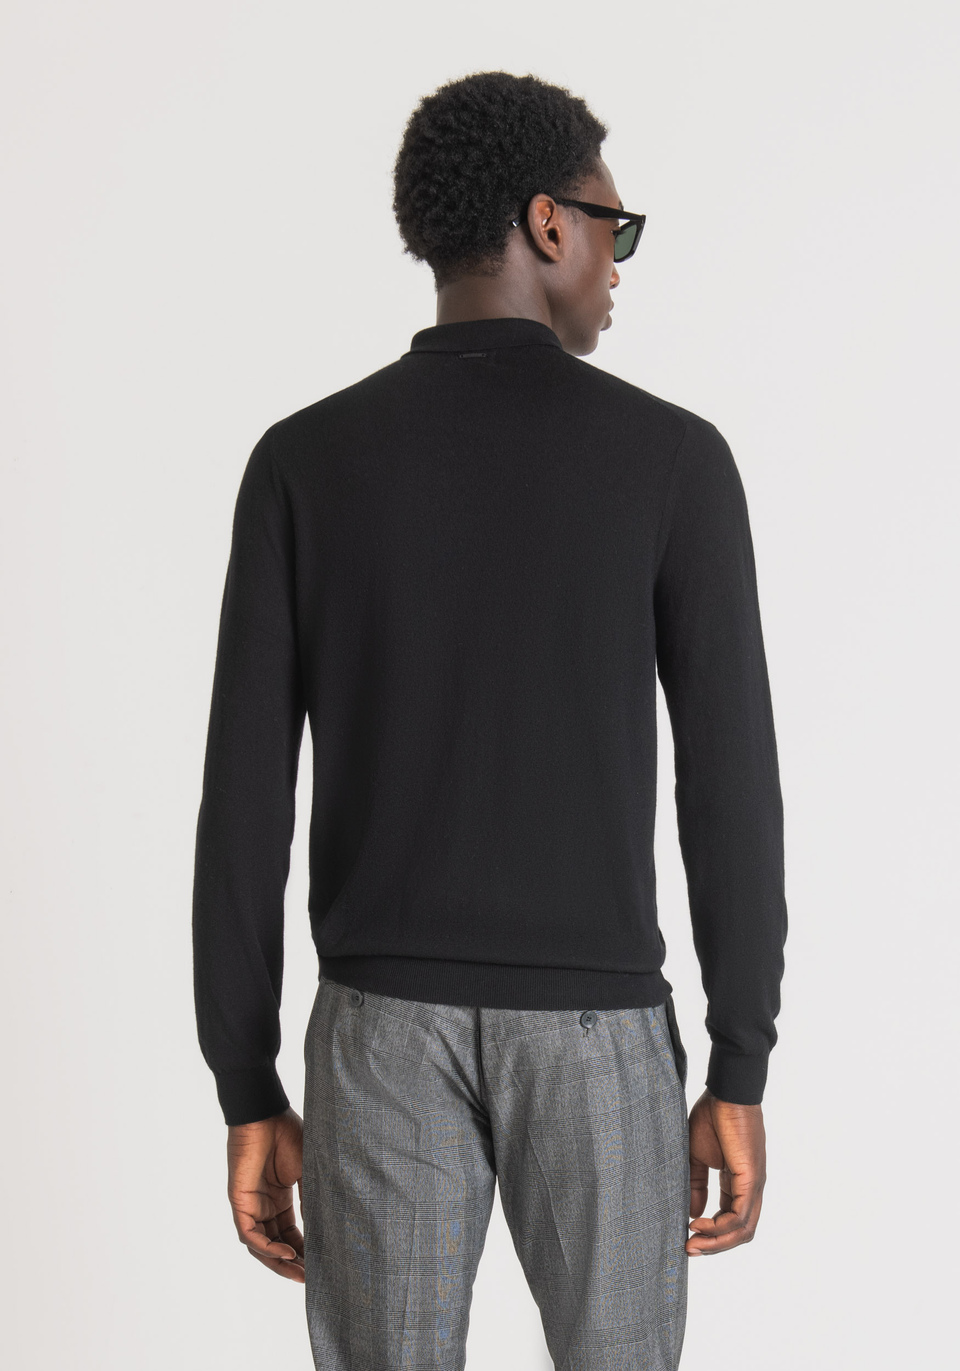 REGULAR FIT POLO SHIRT IN SOFT WOOL BLEND FABRIC - Antony Morato Online Shop